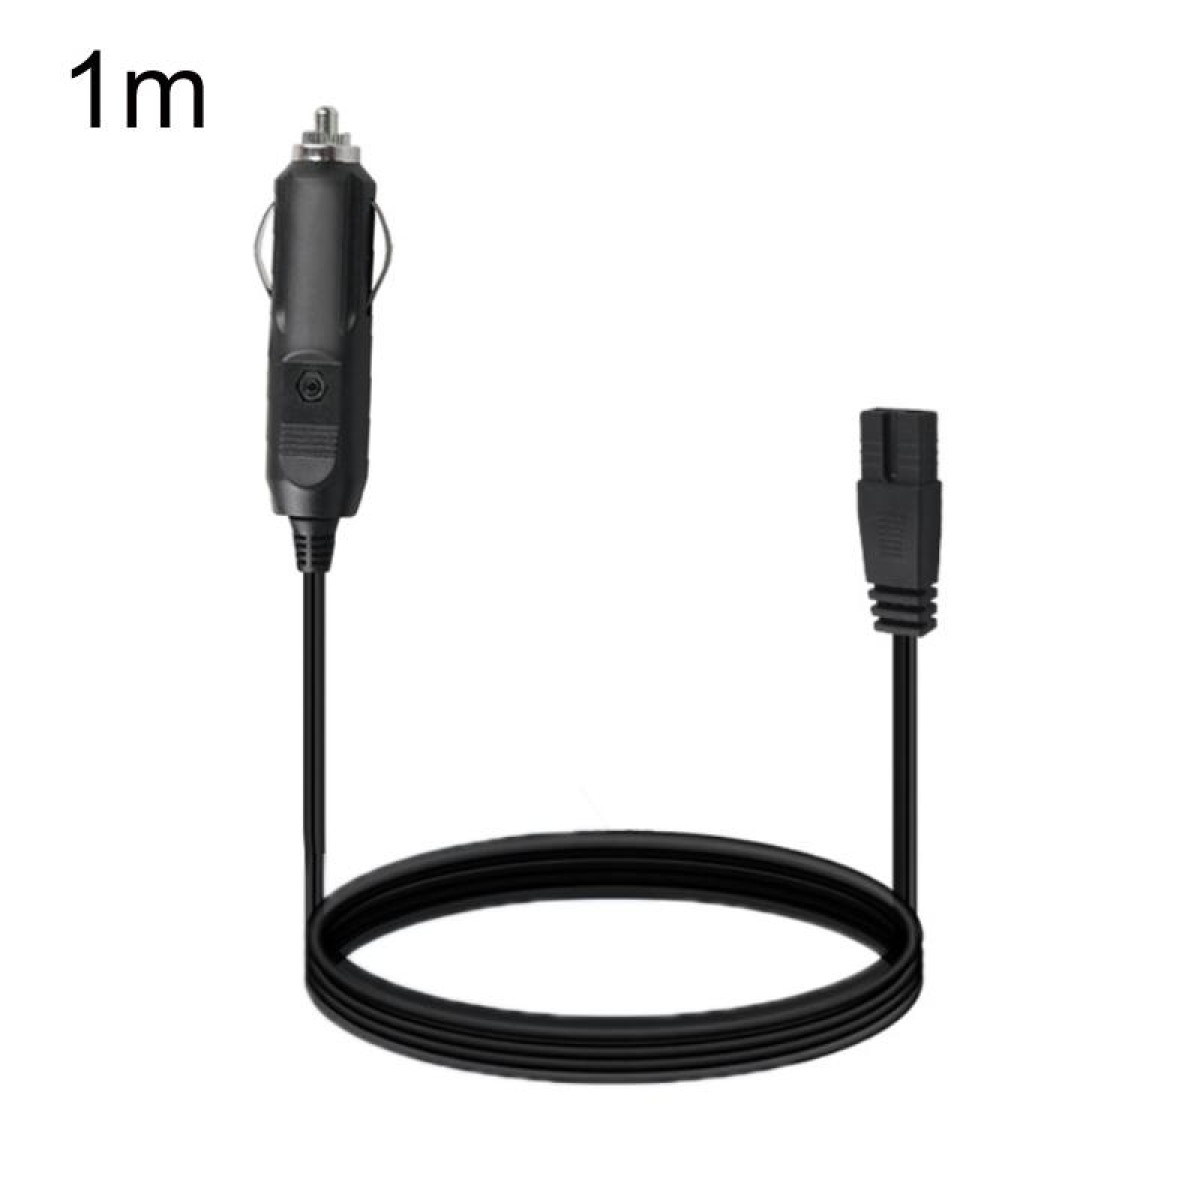 12V/24V Car Refrigerator Cable B Suffix Cigarette Lighter Plug Power Cord, Length: 1m Without Switch